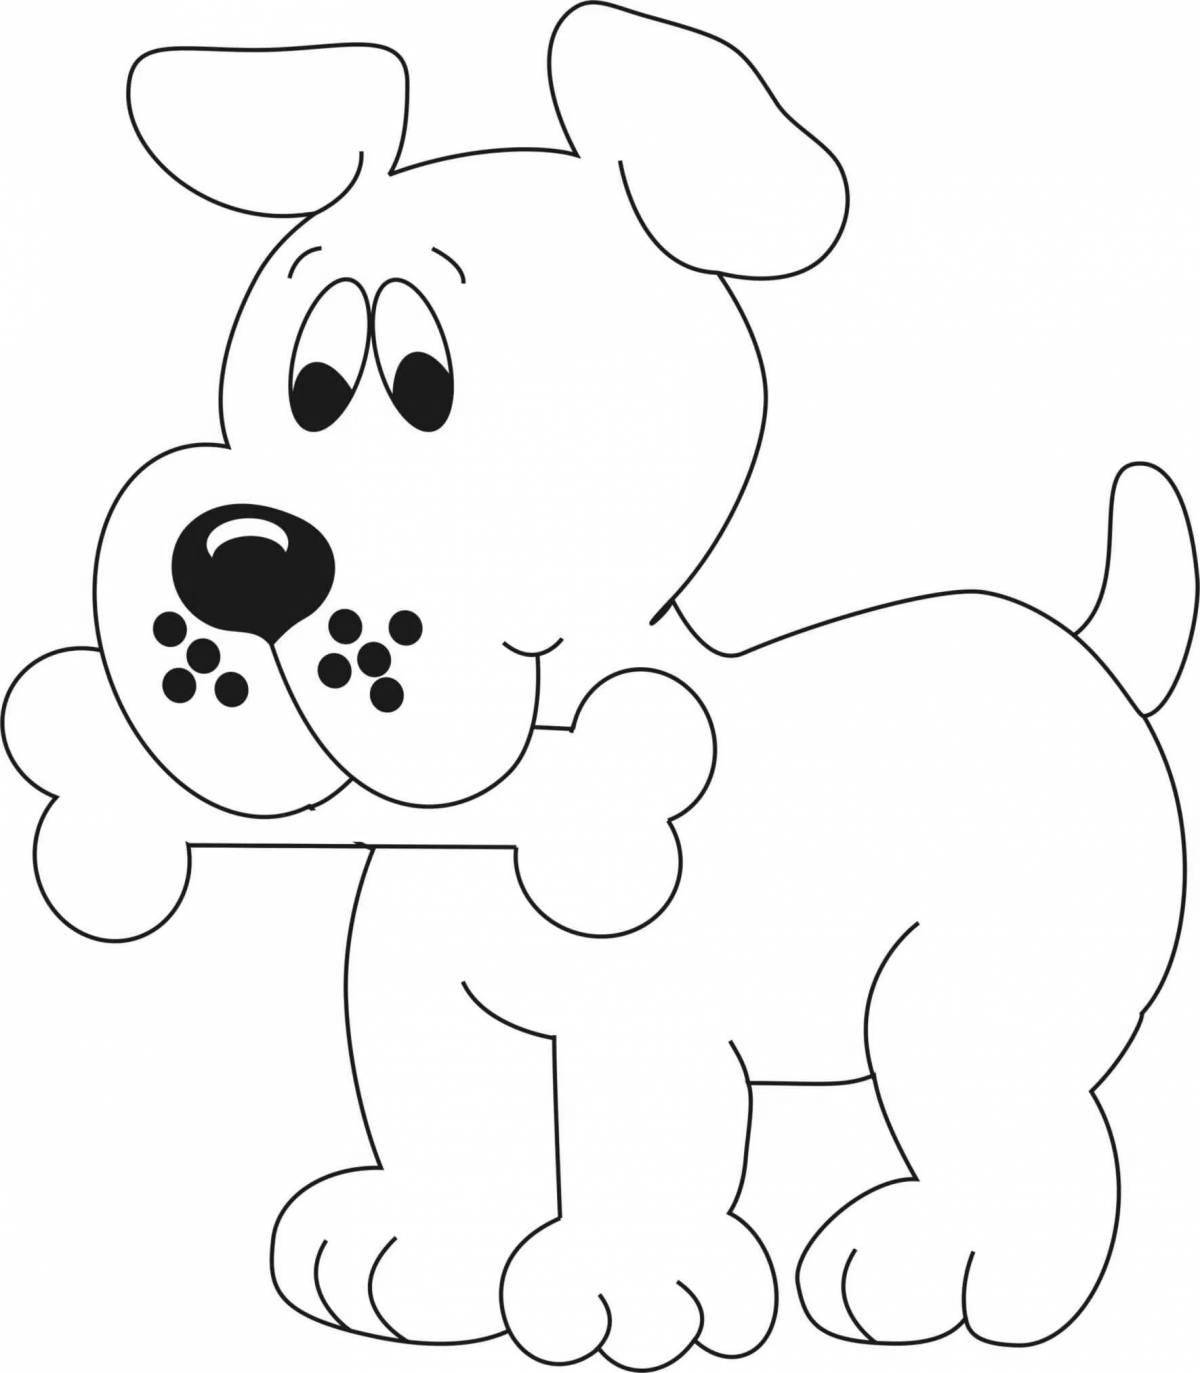 Winking coloring picture of a puppy